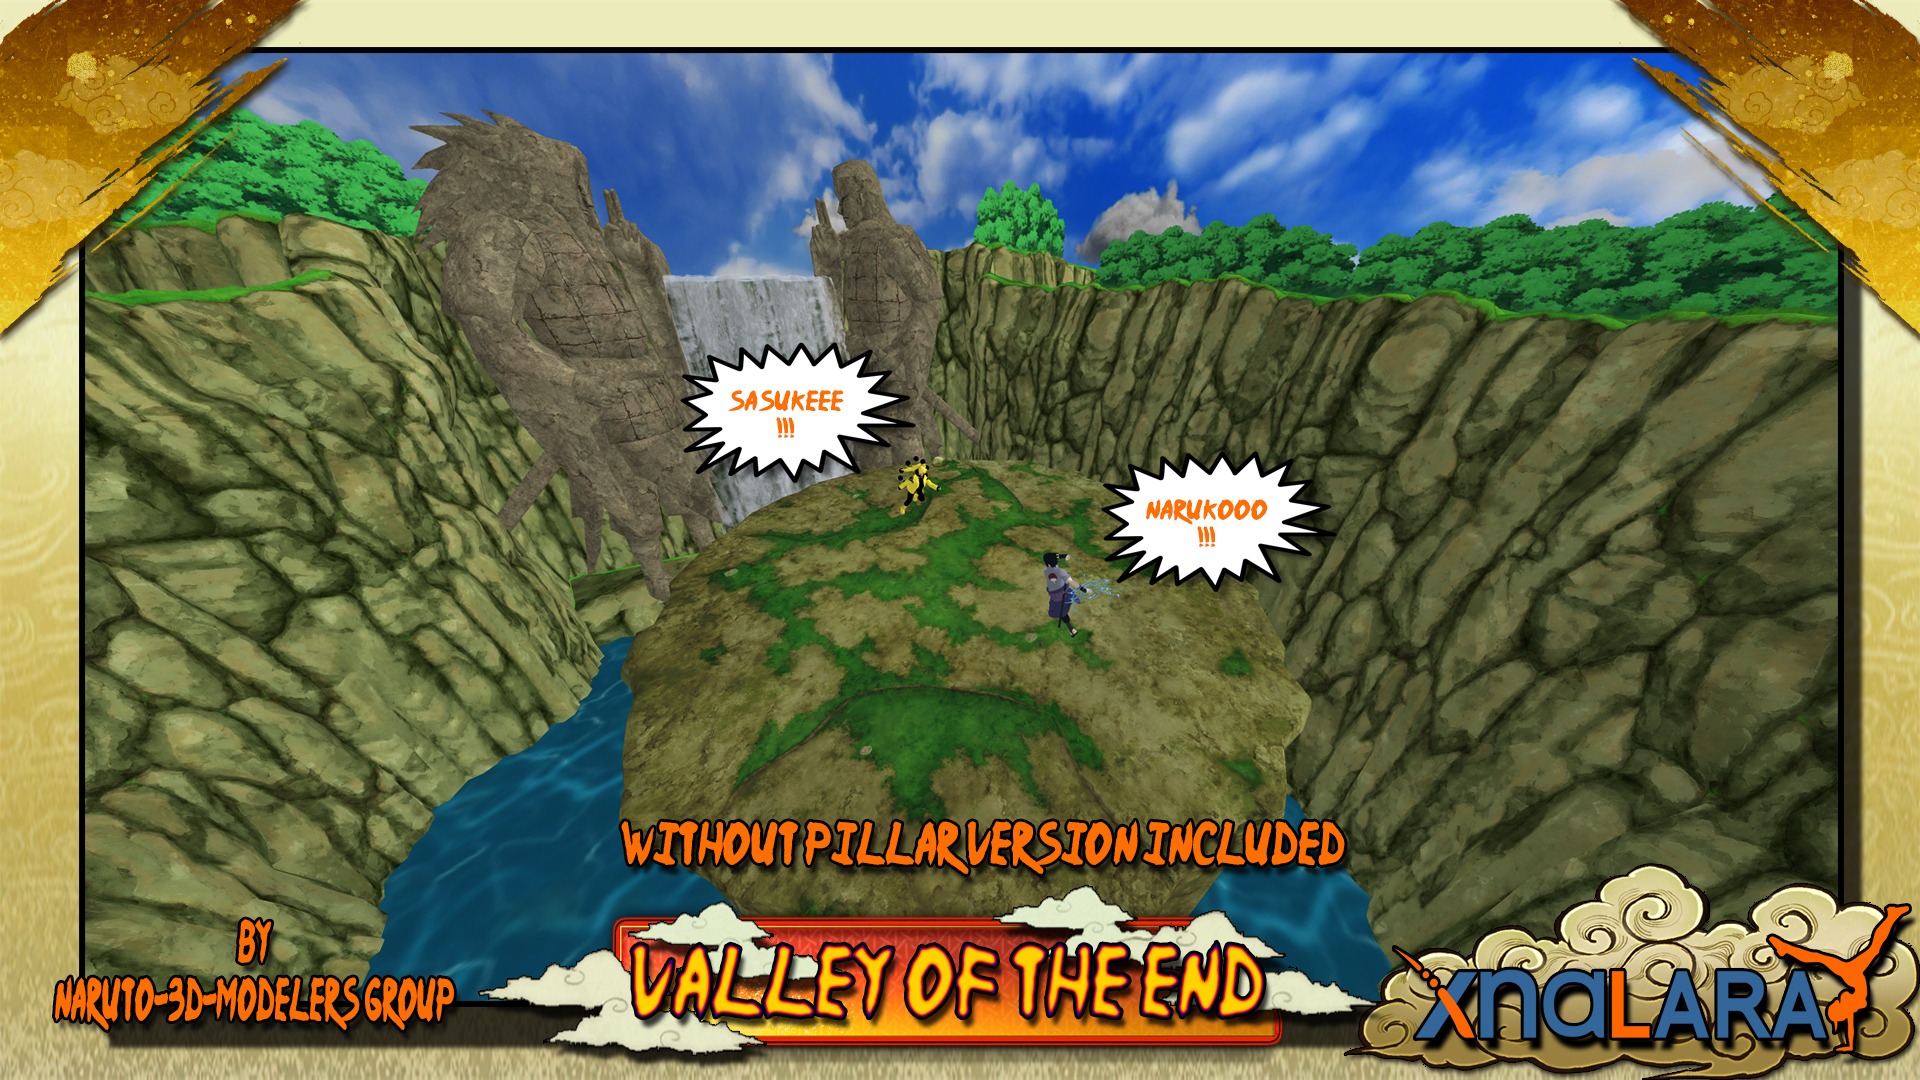 Naruto Stage - Valley of the End (Custom)